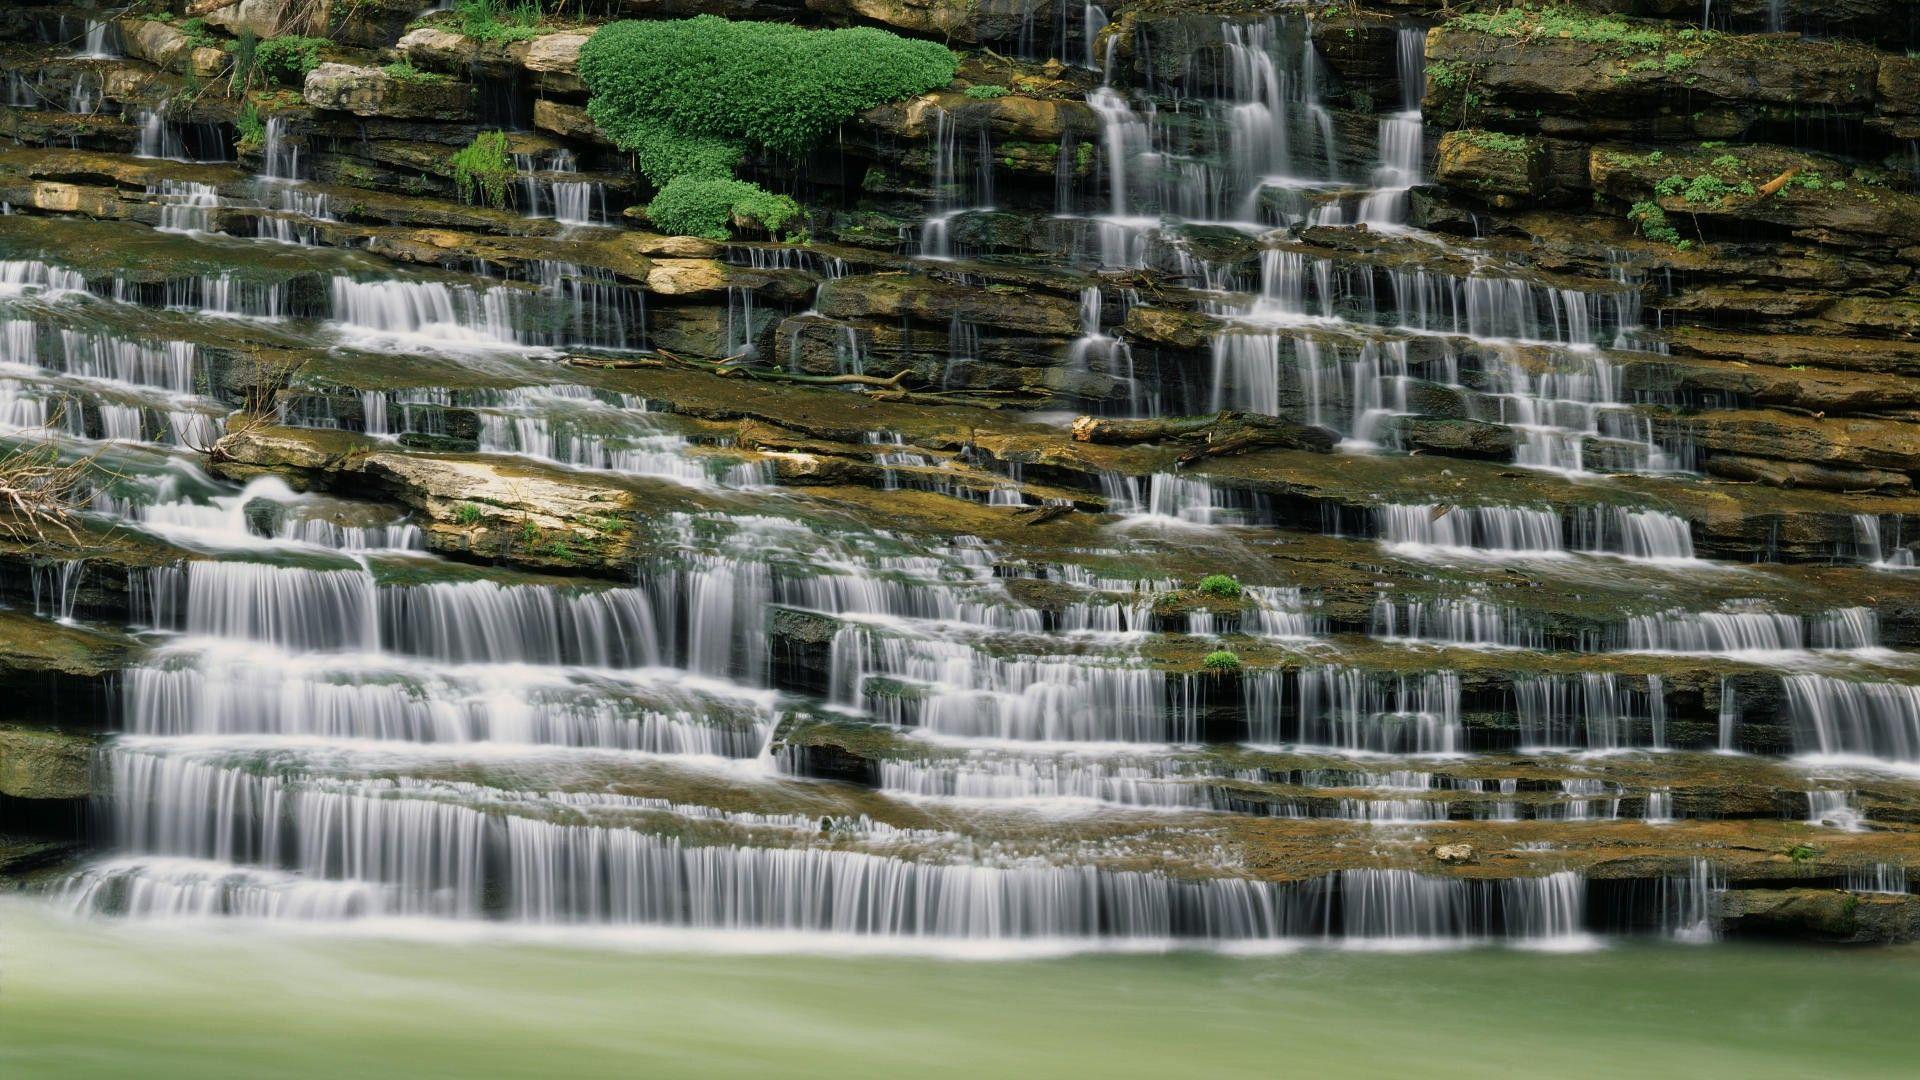 Nature, falls, caney, great, park, tennessee, state, rock, island